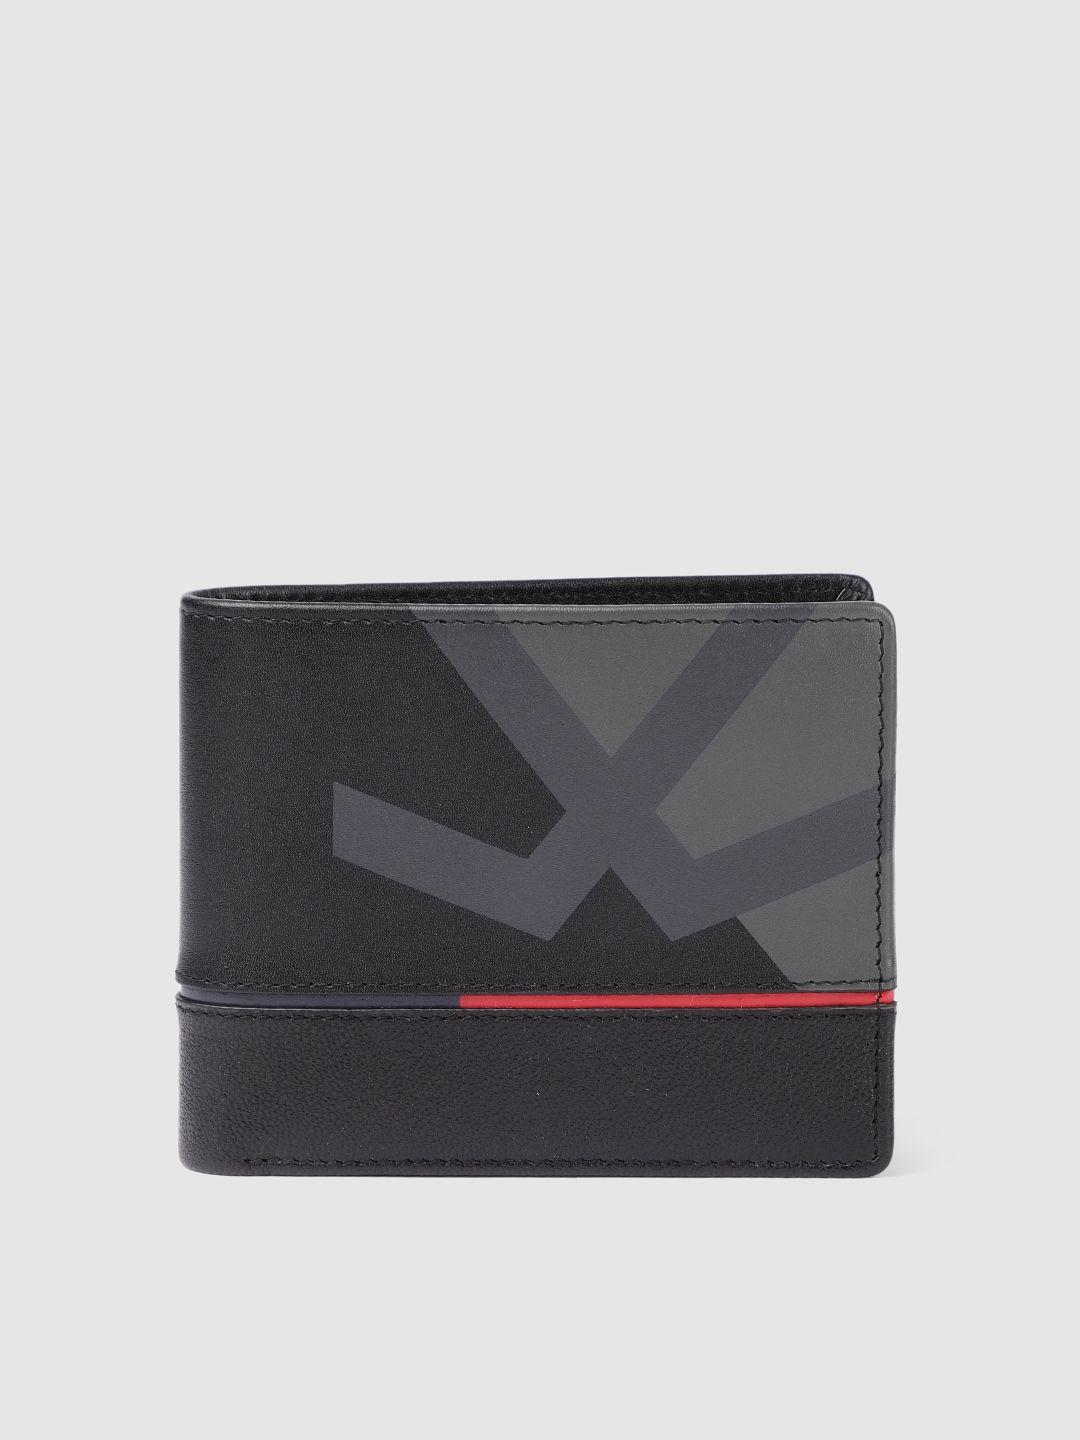 WROGN Men Brand Logo Printed Leather Two Fold Wallet